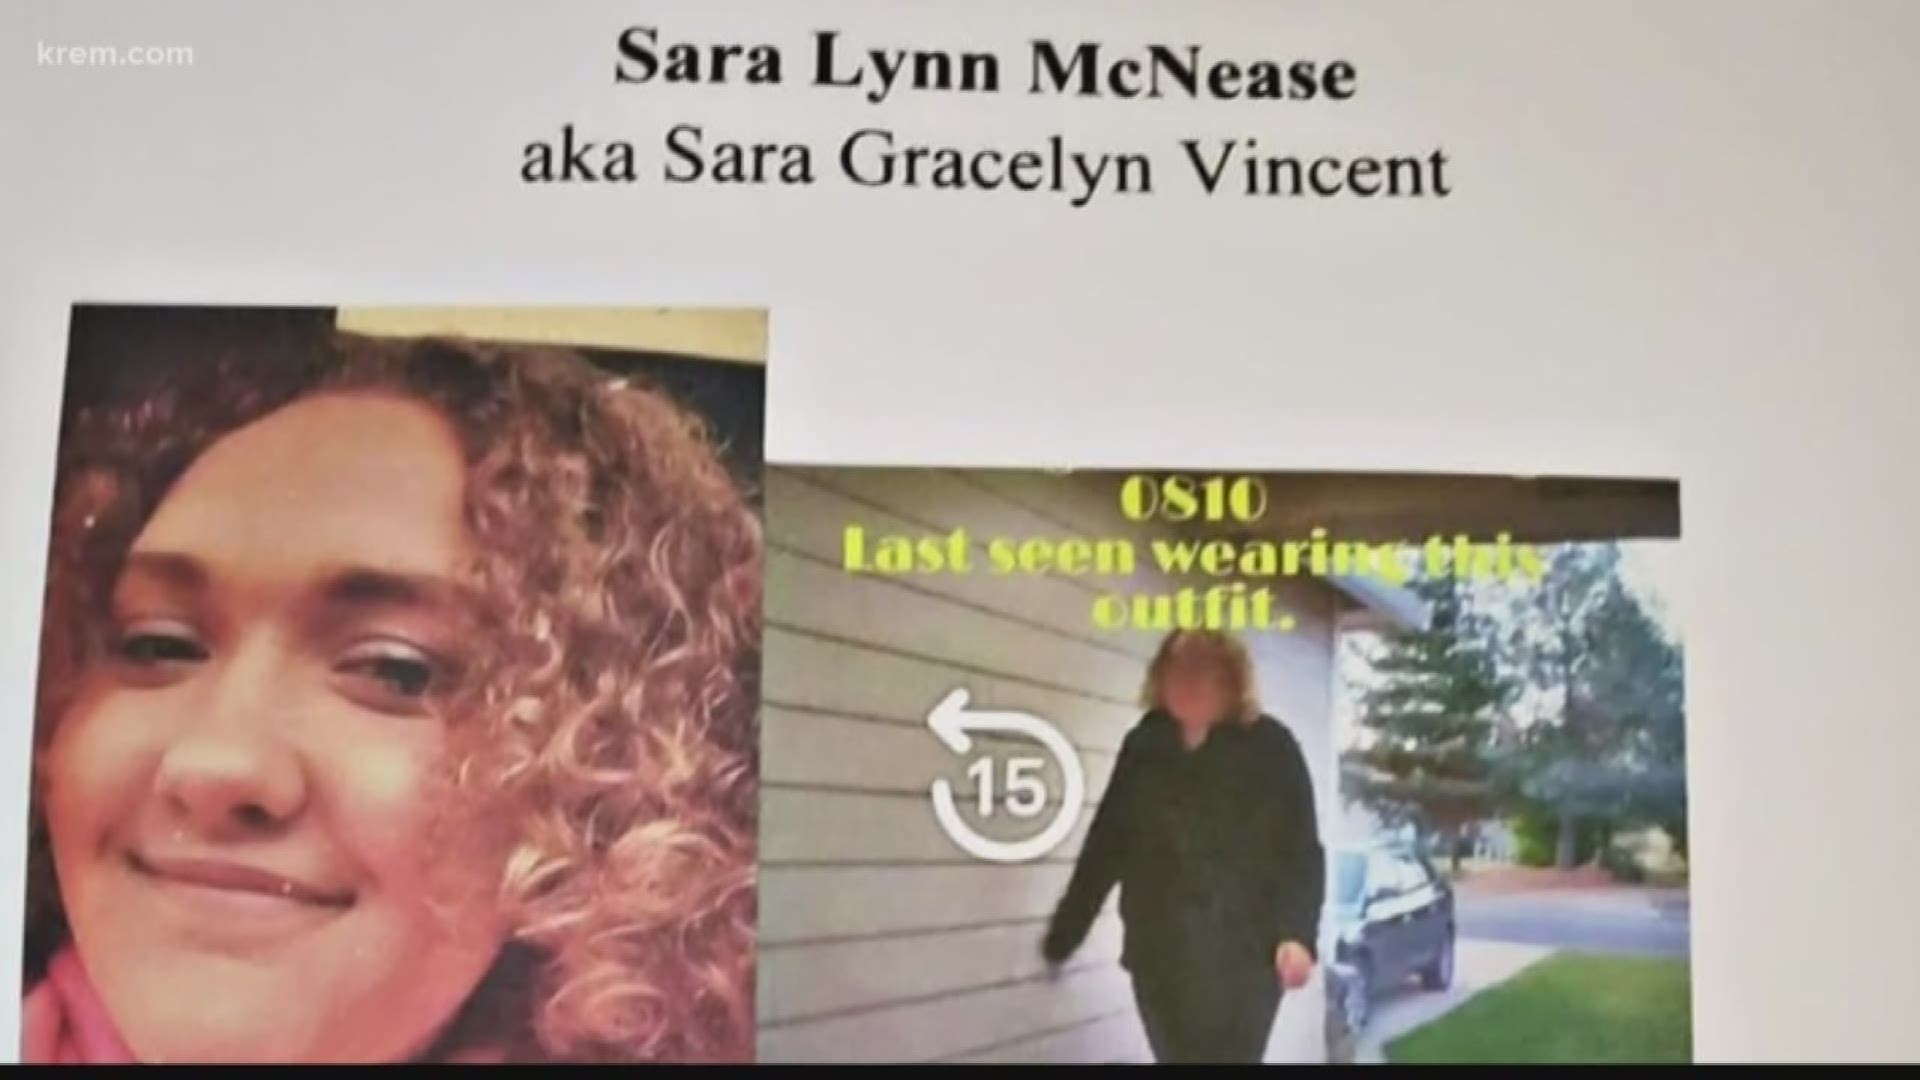 The Spokane Police Major Crimes Unit has been in contact with an attorney representing McNease and confirmed she is safe.